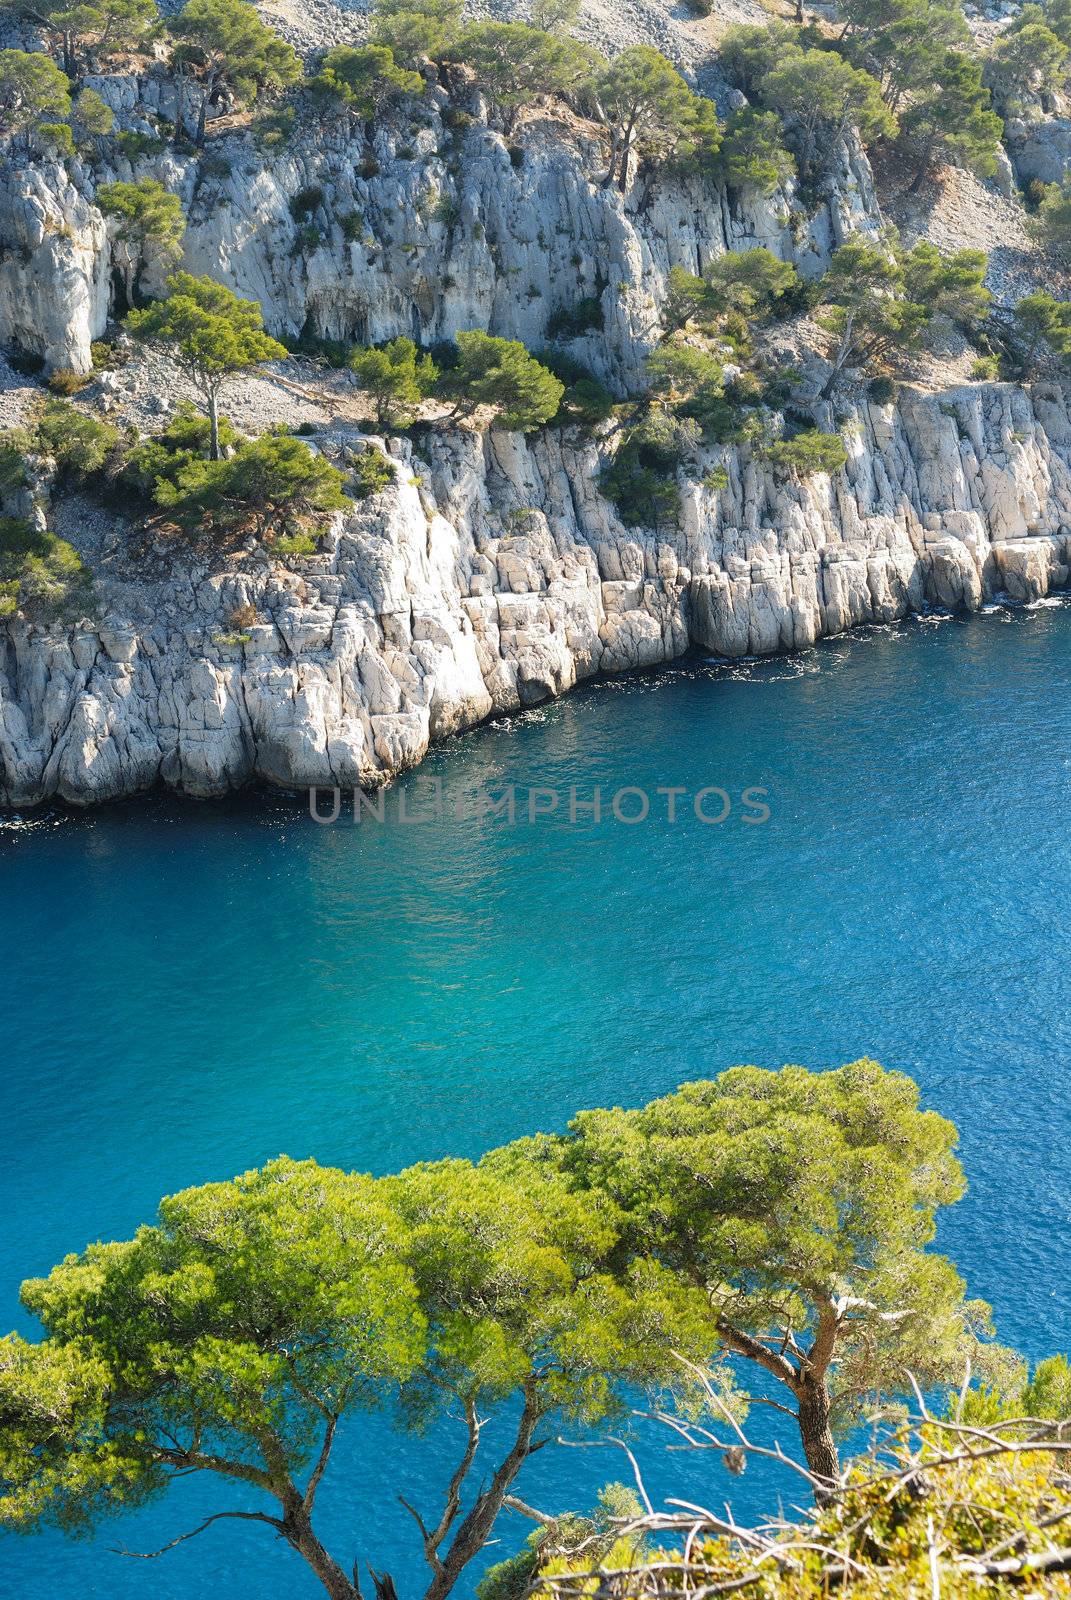 Calanques of Cassis, France by ventdusud